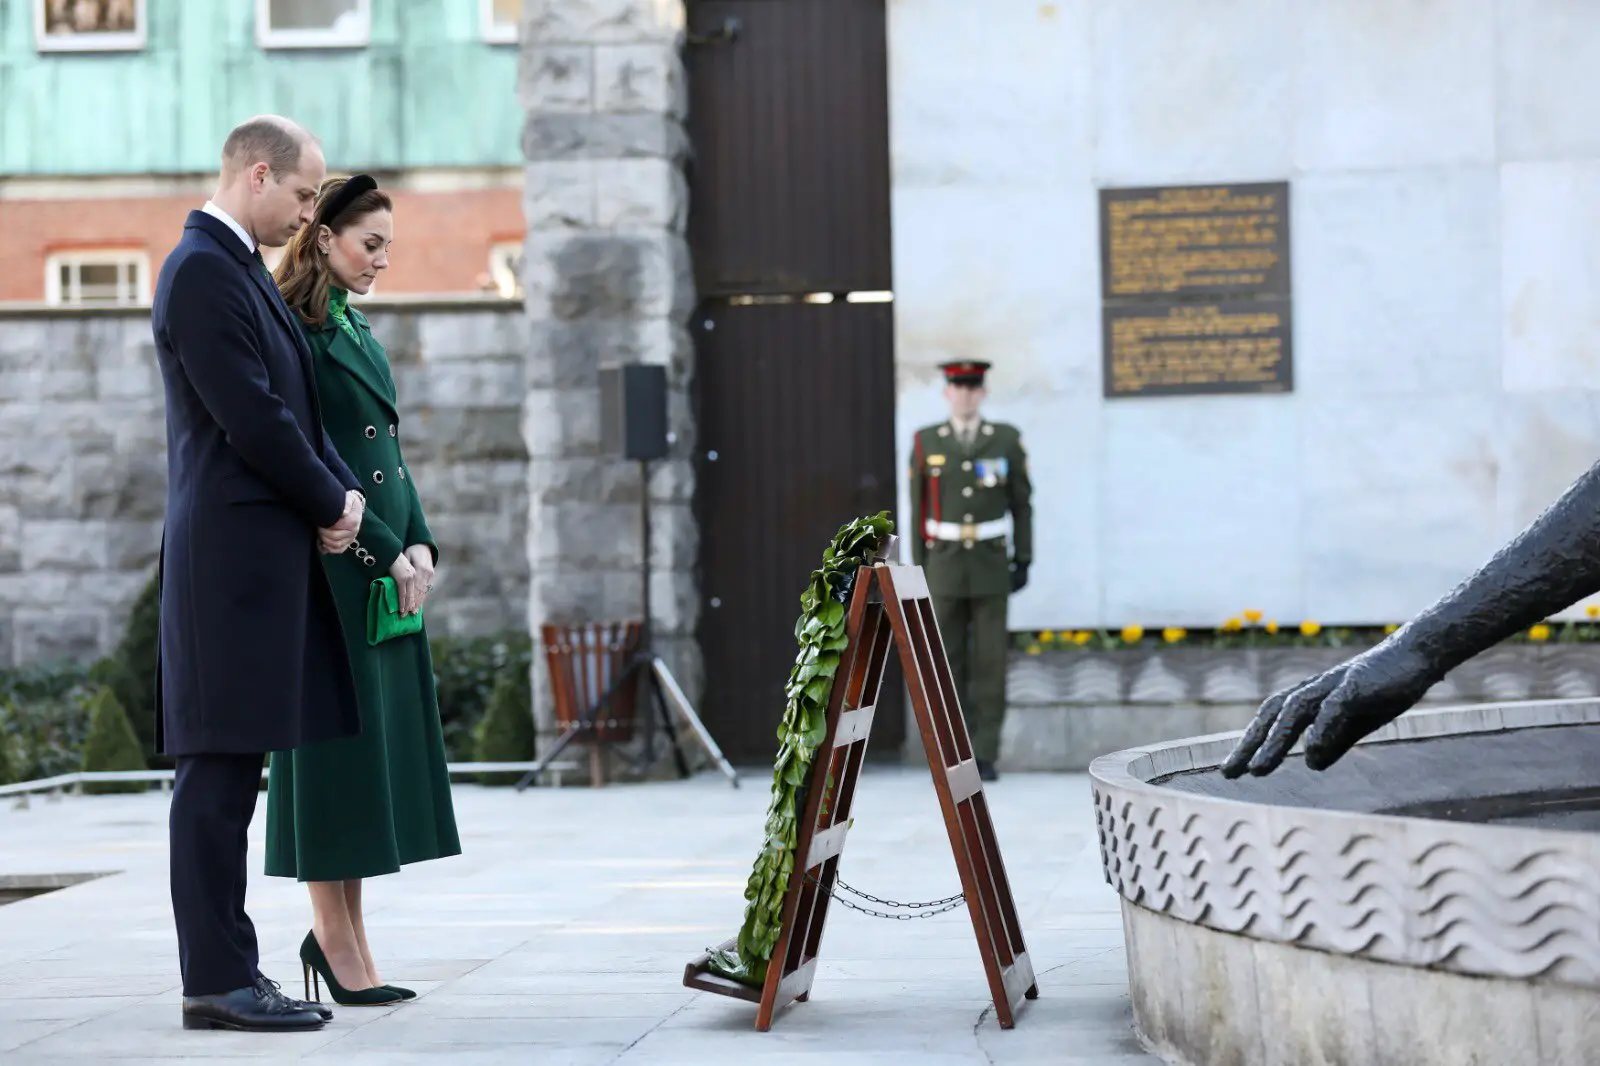 William and Catherine followed Her Majesty's steps and laid a wreath at the Garden